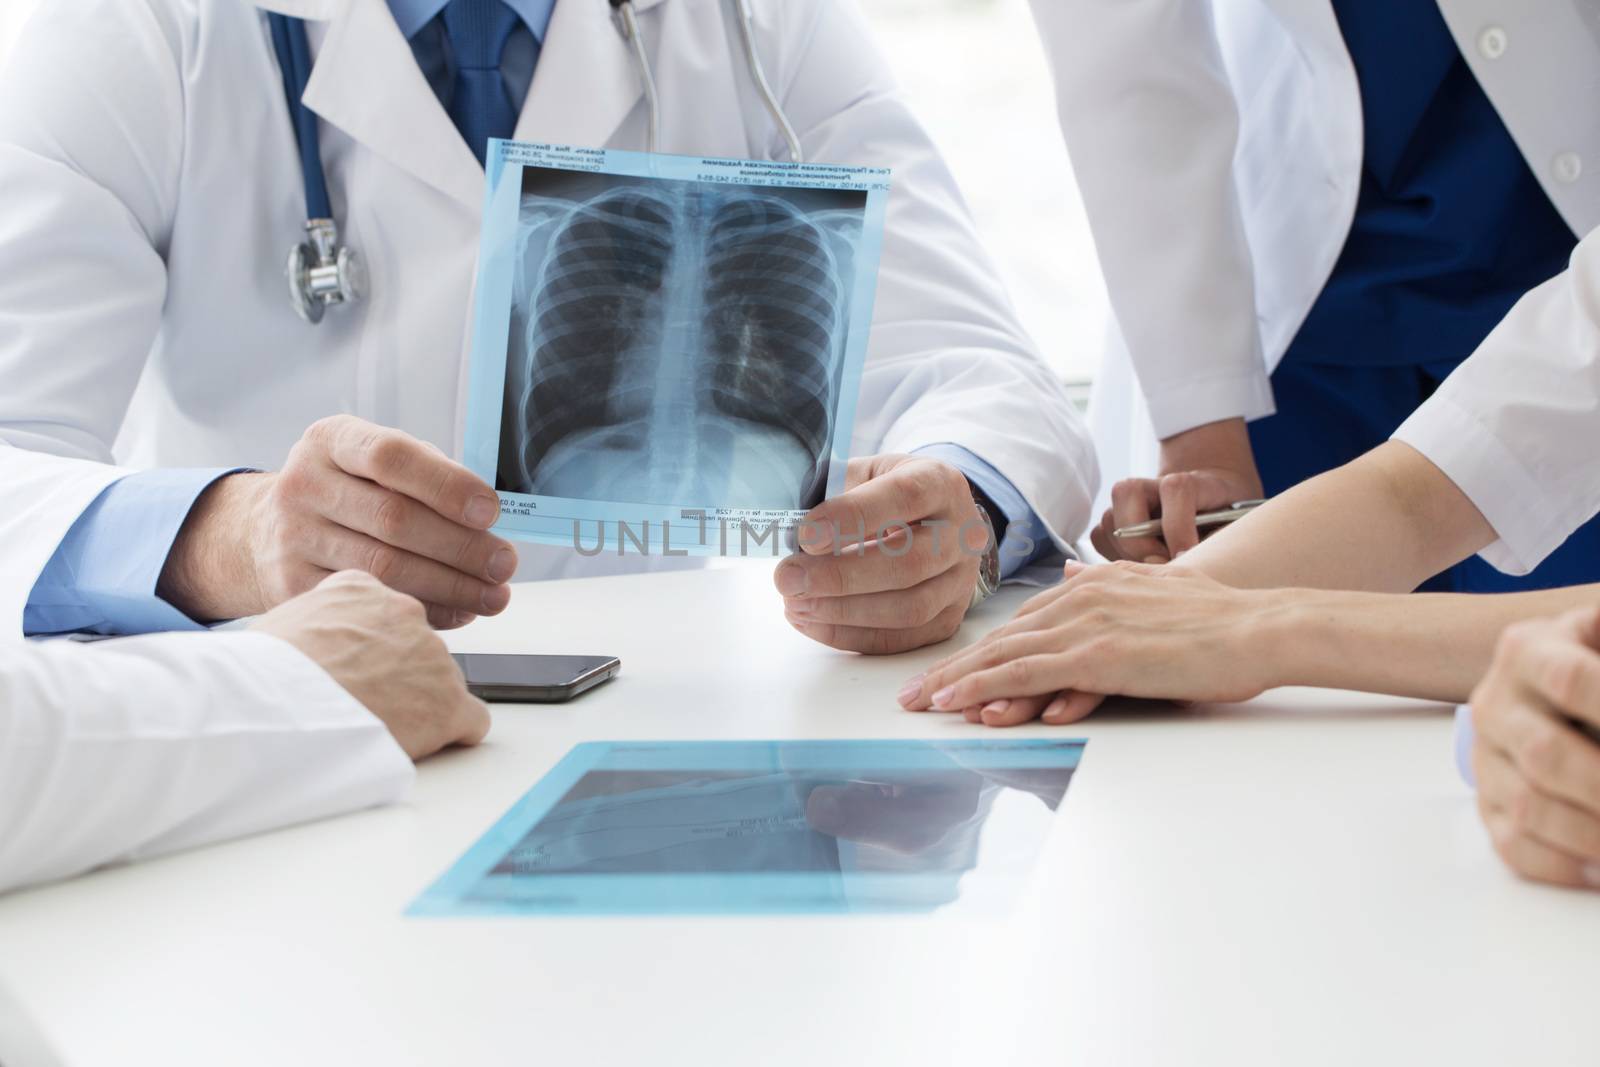 Group of doctors look and discuss x-ray in a clinic or hospital